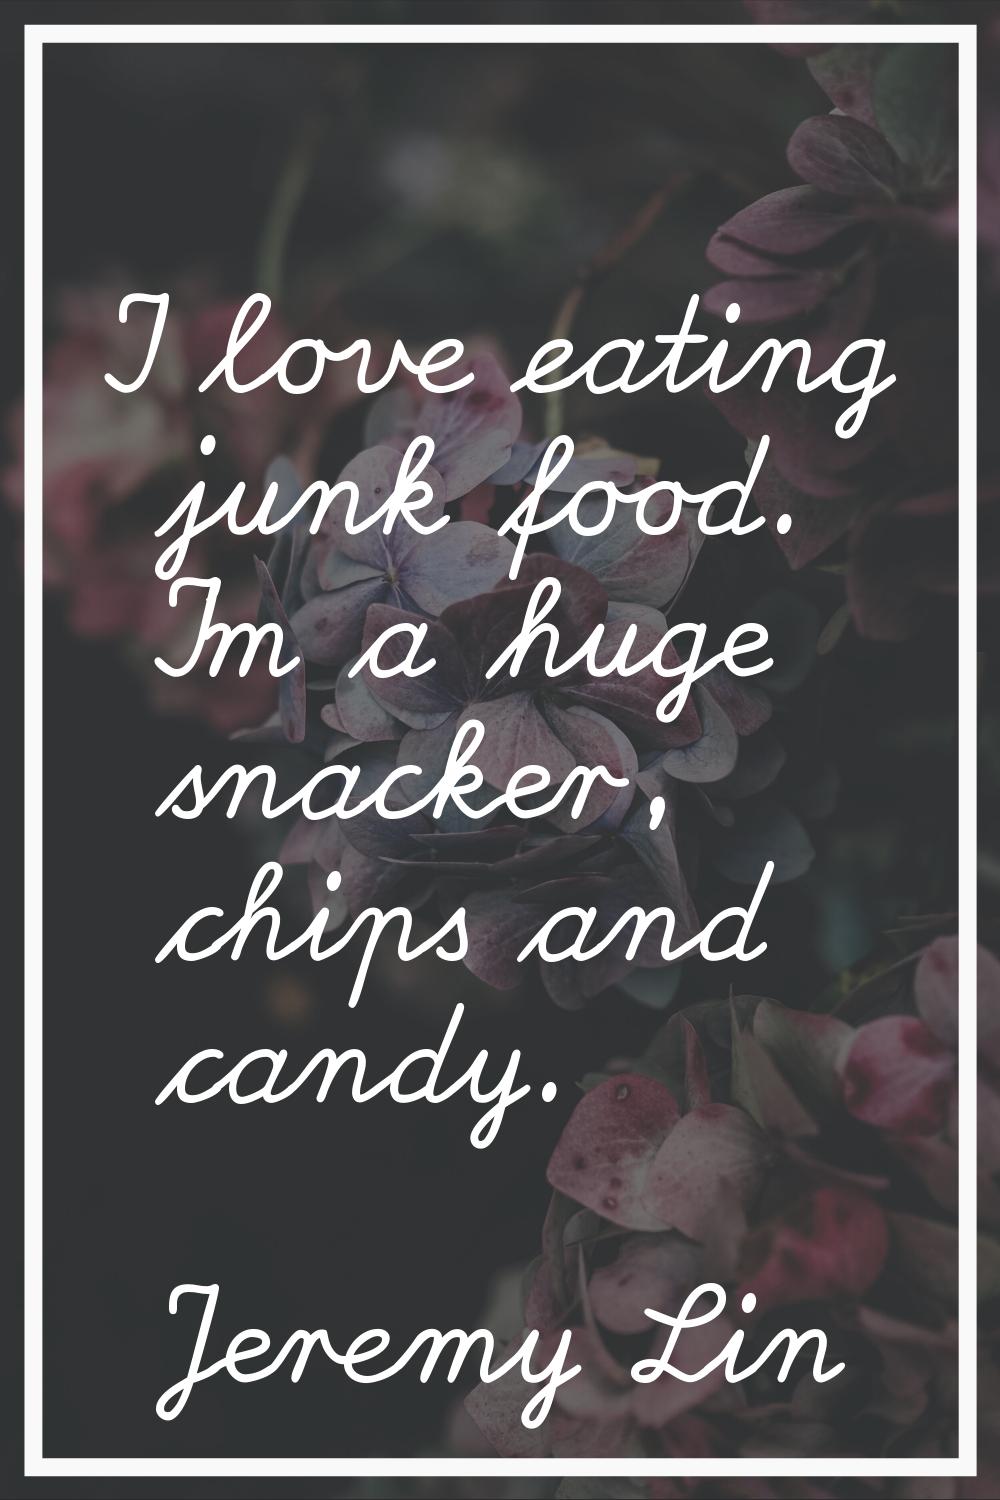 I love eating junk food. I'm a huge snacker, chips and candy.